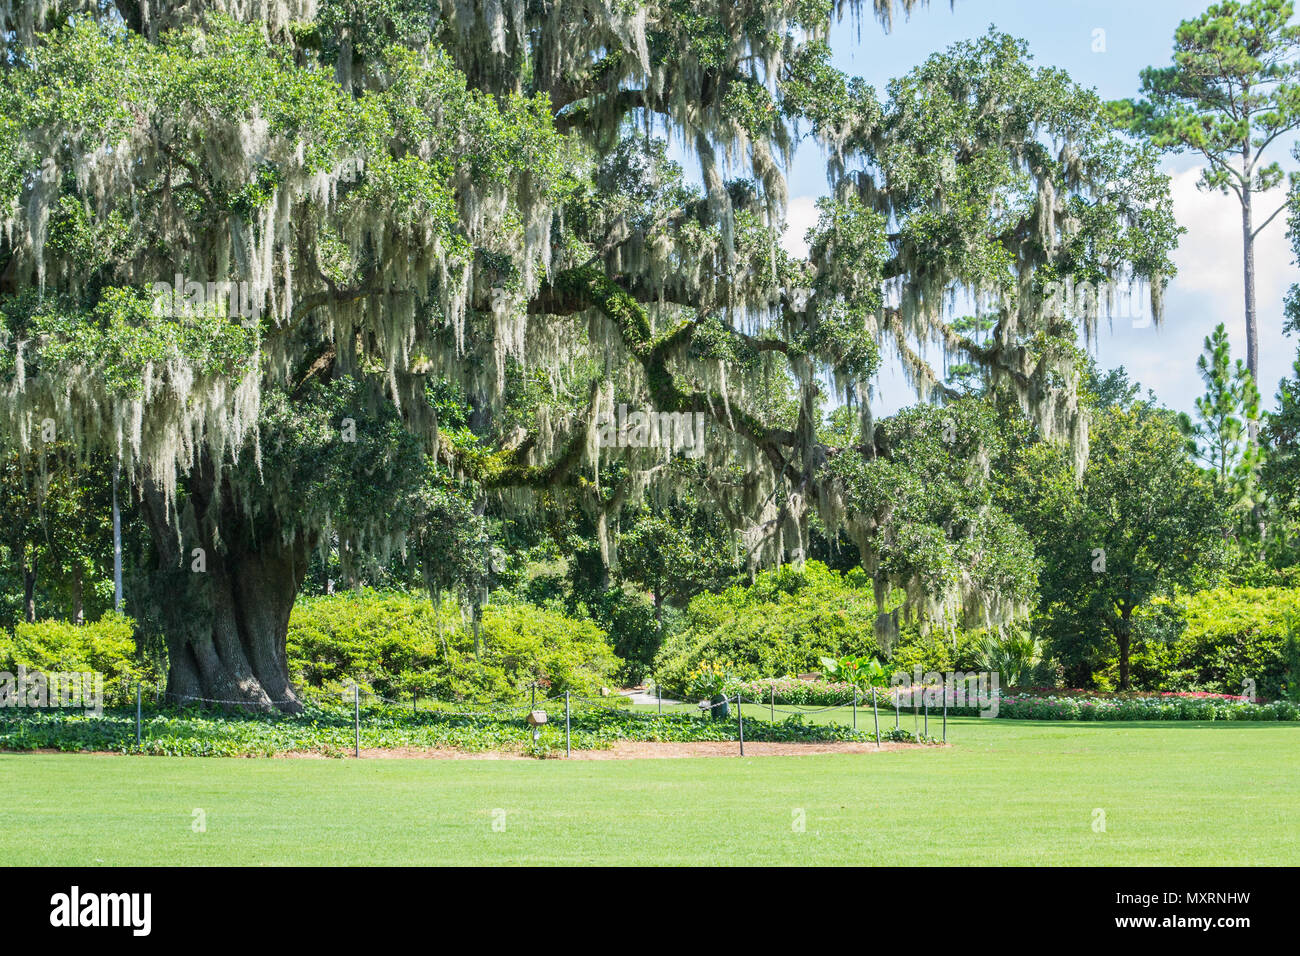 Airlie Gardens In Wilmington North Carolina Shows Off The Beauty